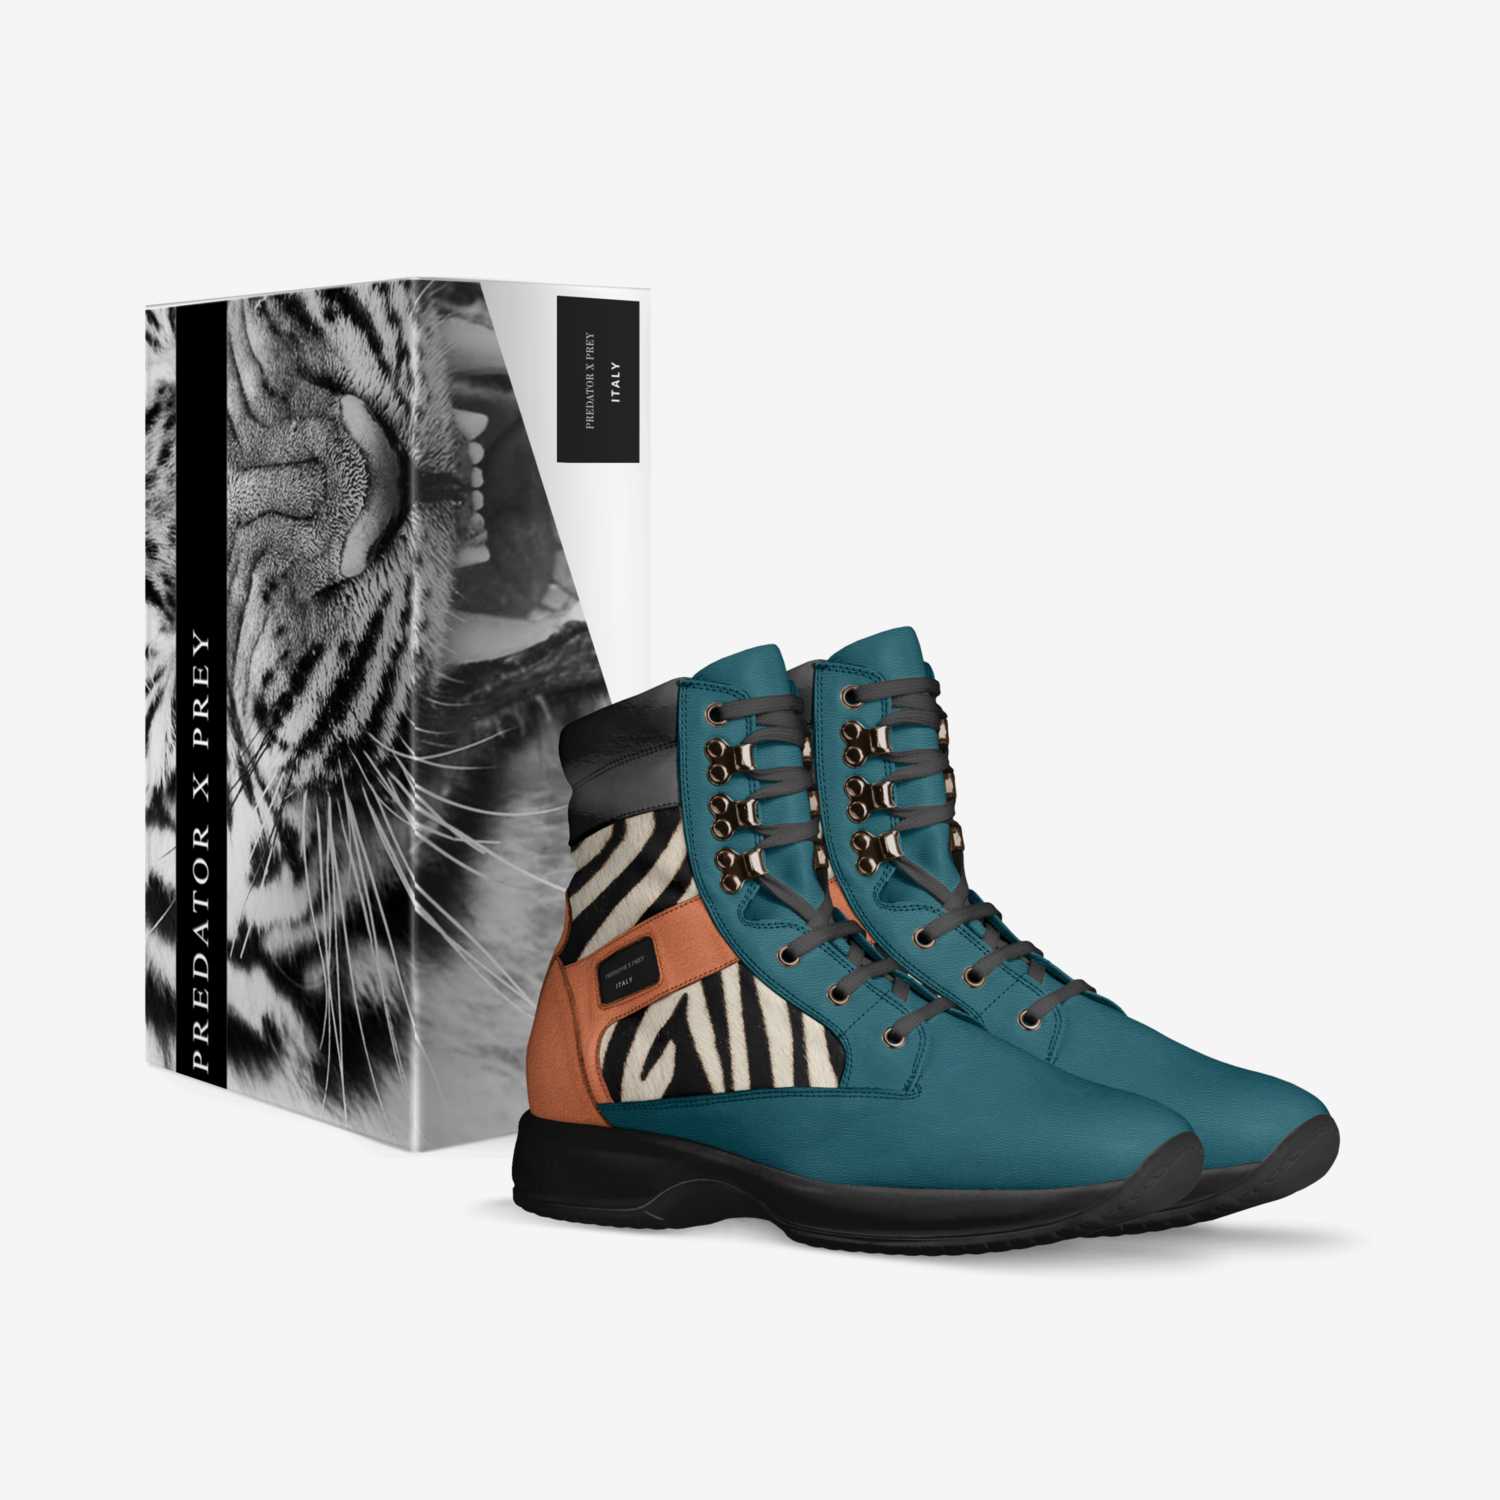 ''SAHARA UNLIMITED'' custom made in Italy shoes by Halley Washington | Box view